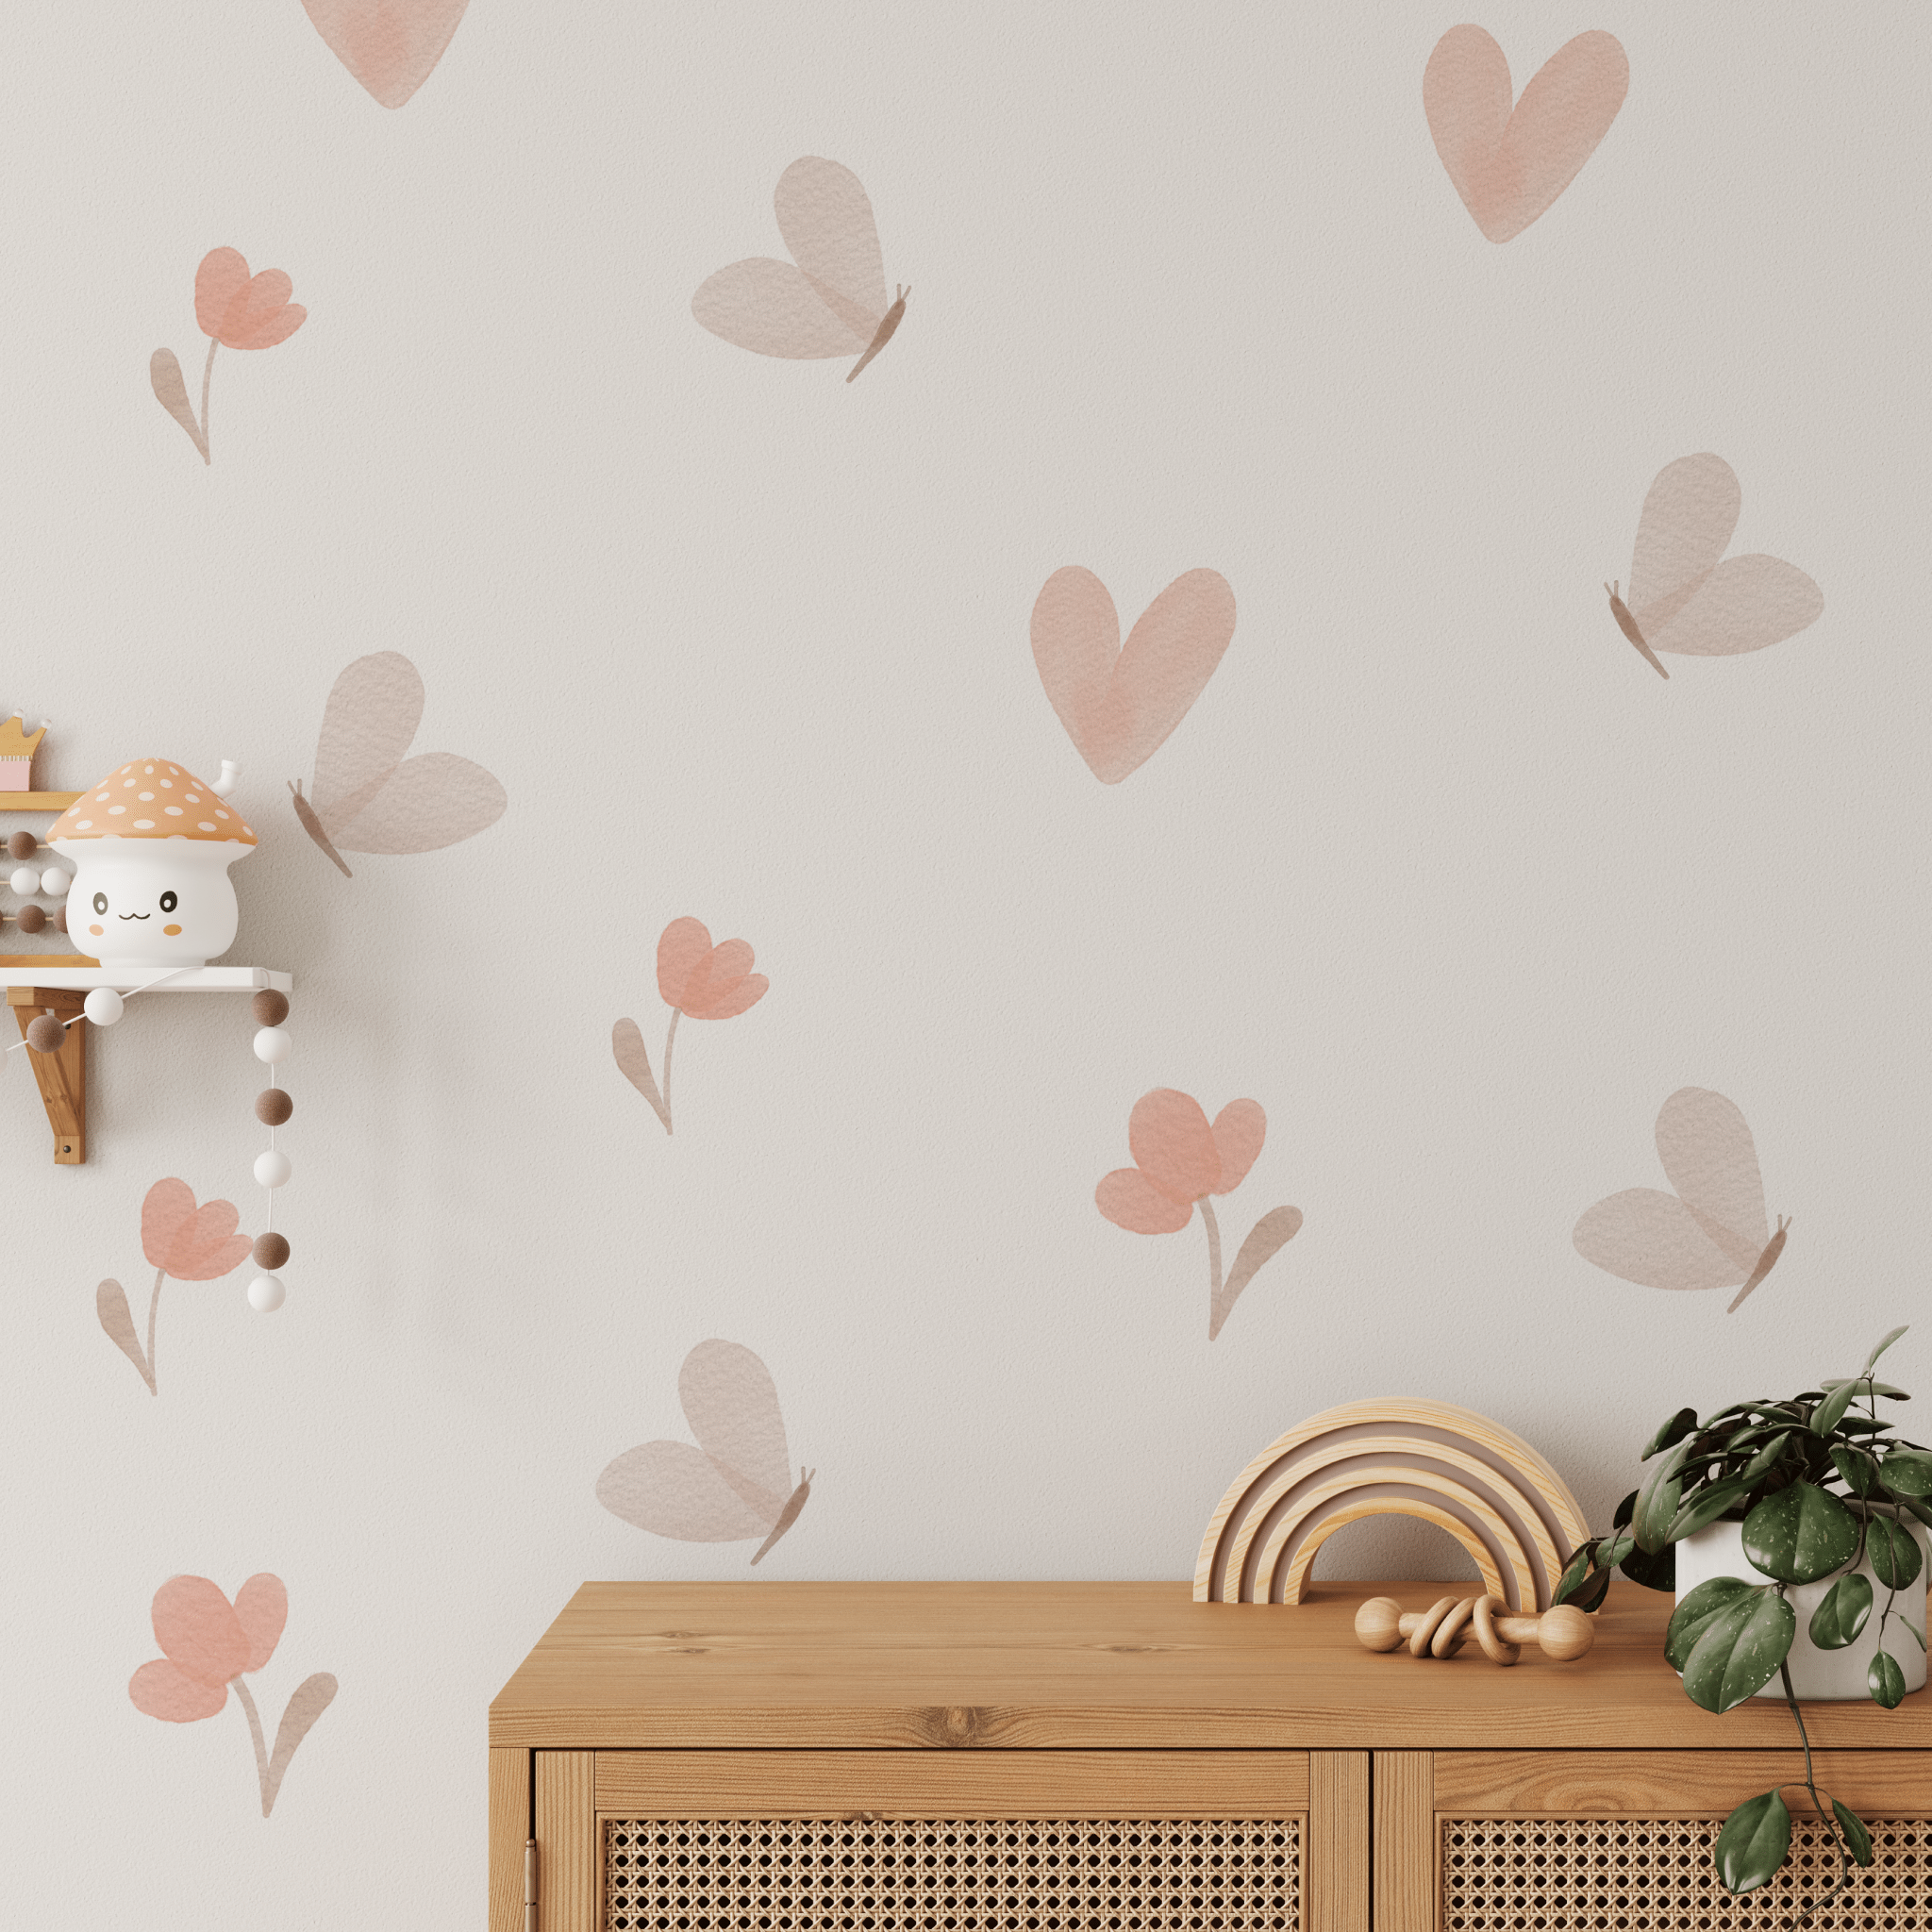 Exclusive flower, butterfly and heart wall stickers for boho style room